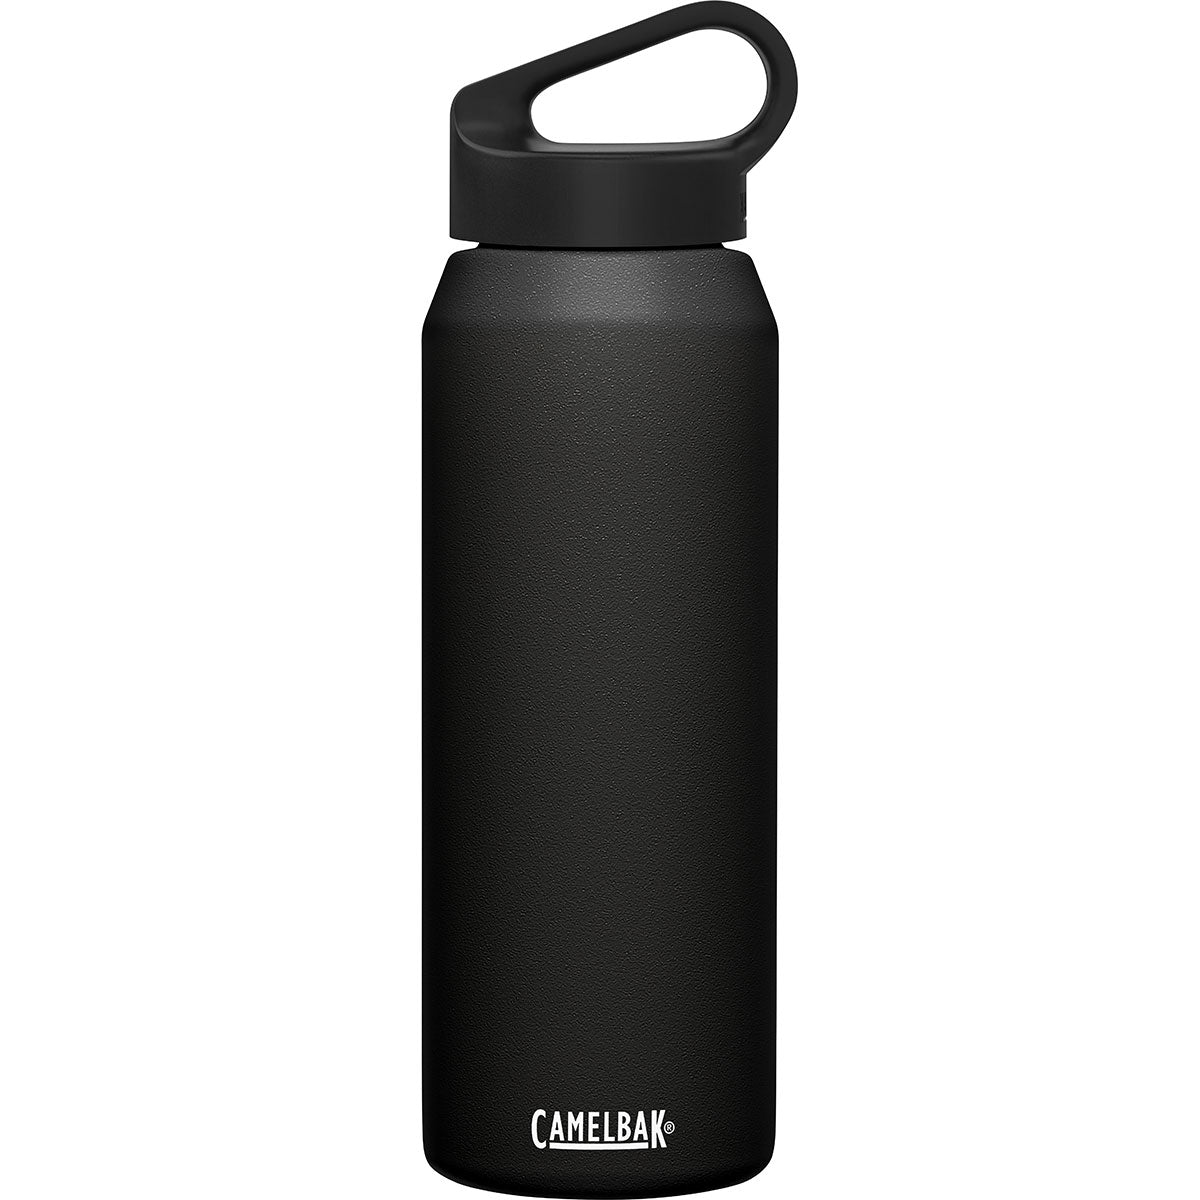 Camelbak Carry Cap - 1L Insulated Stainless